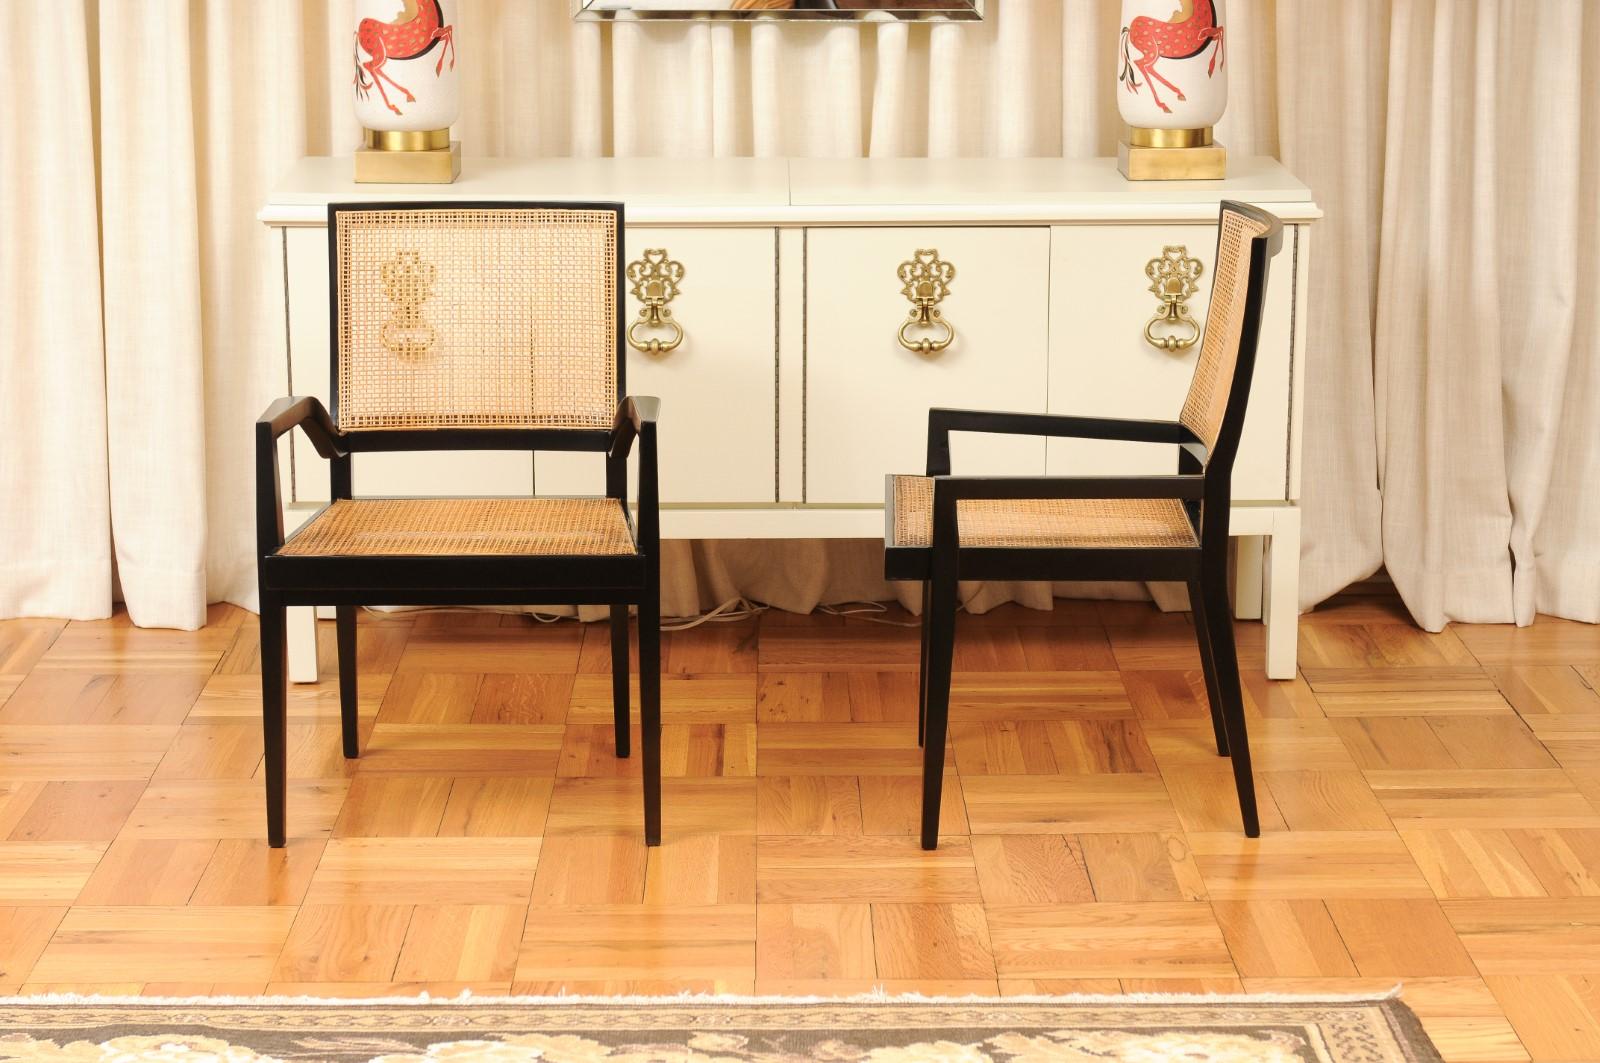 Spectacular Set of 20 Sleek Double Cane Dining Chairs by Michael Taylor For Sale 5